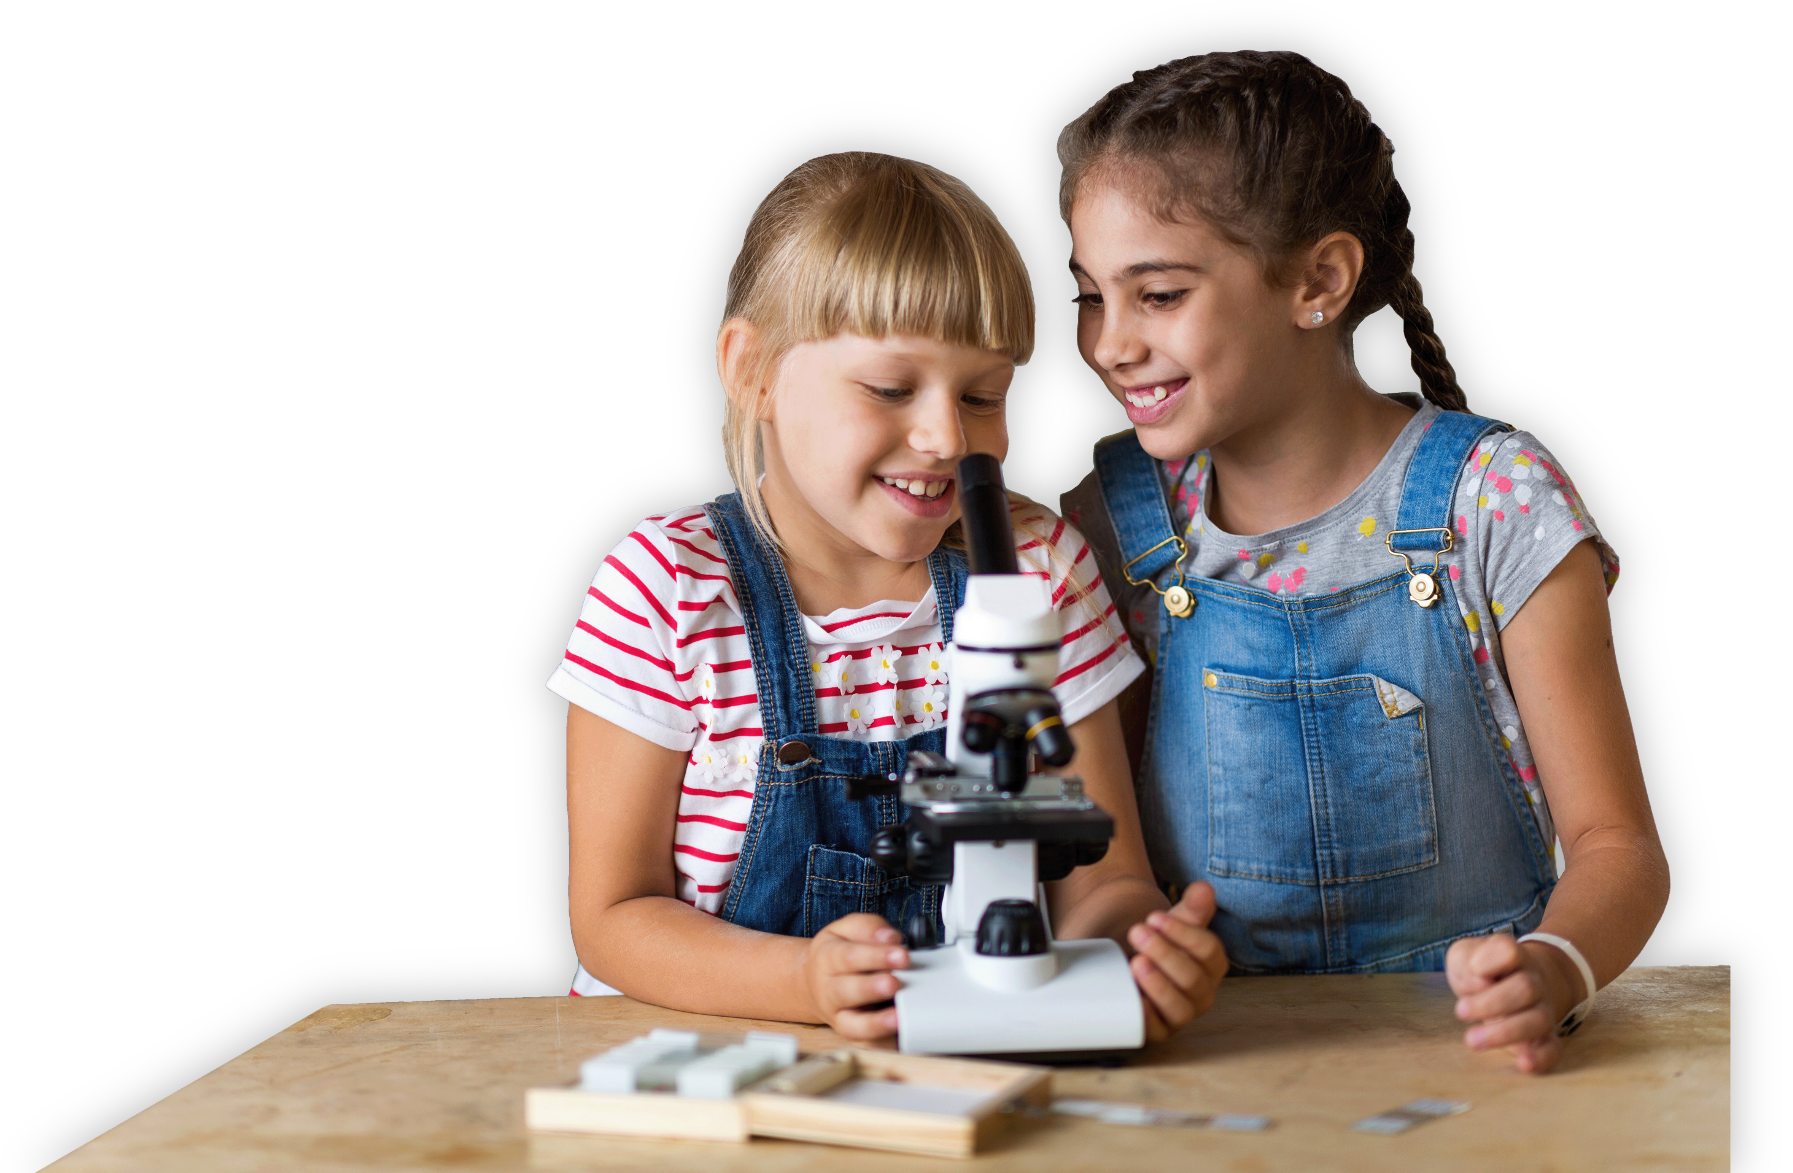 Students looking at microscope